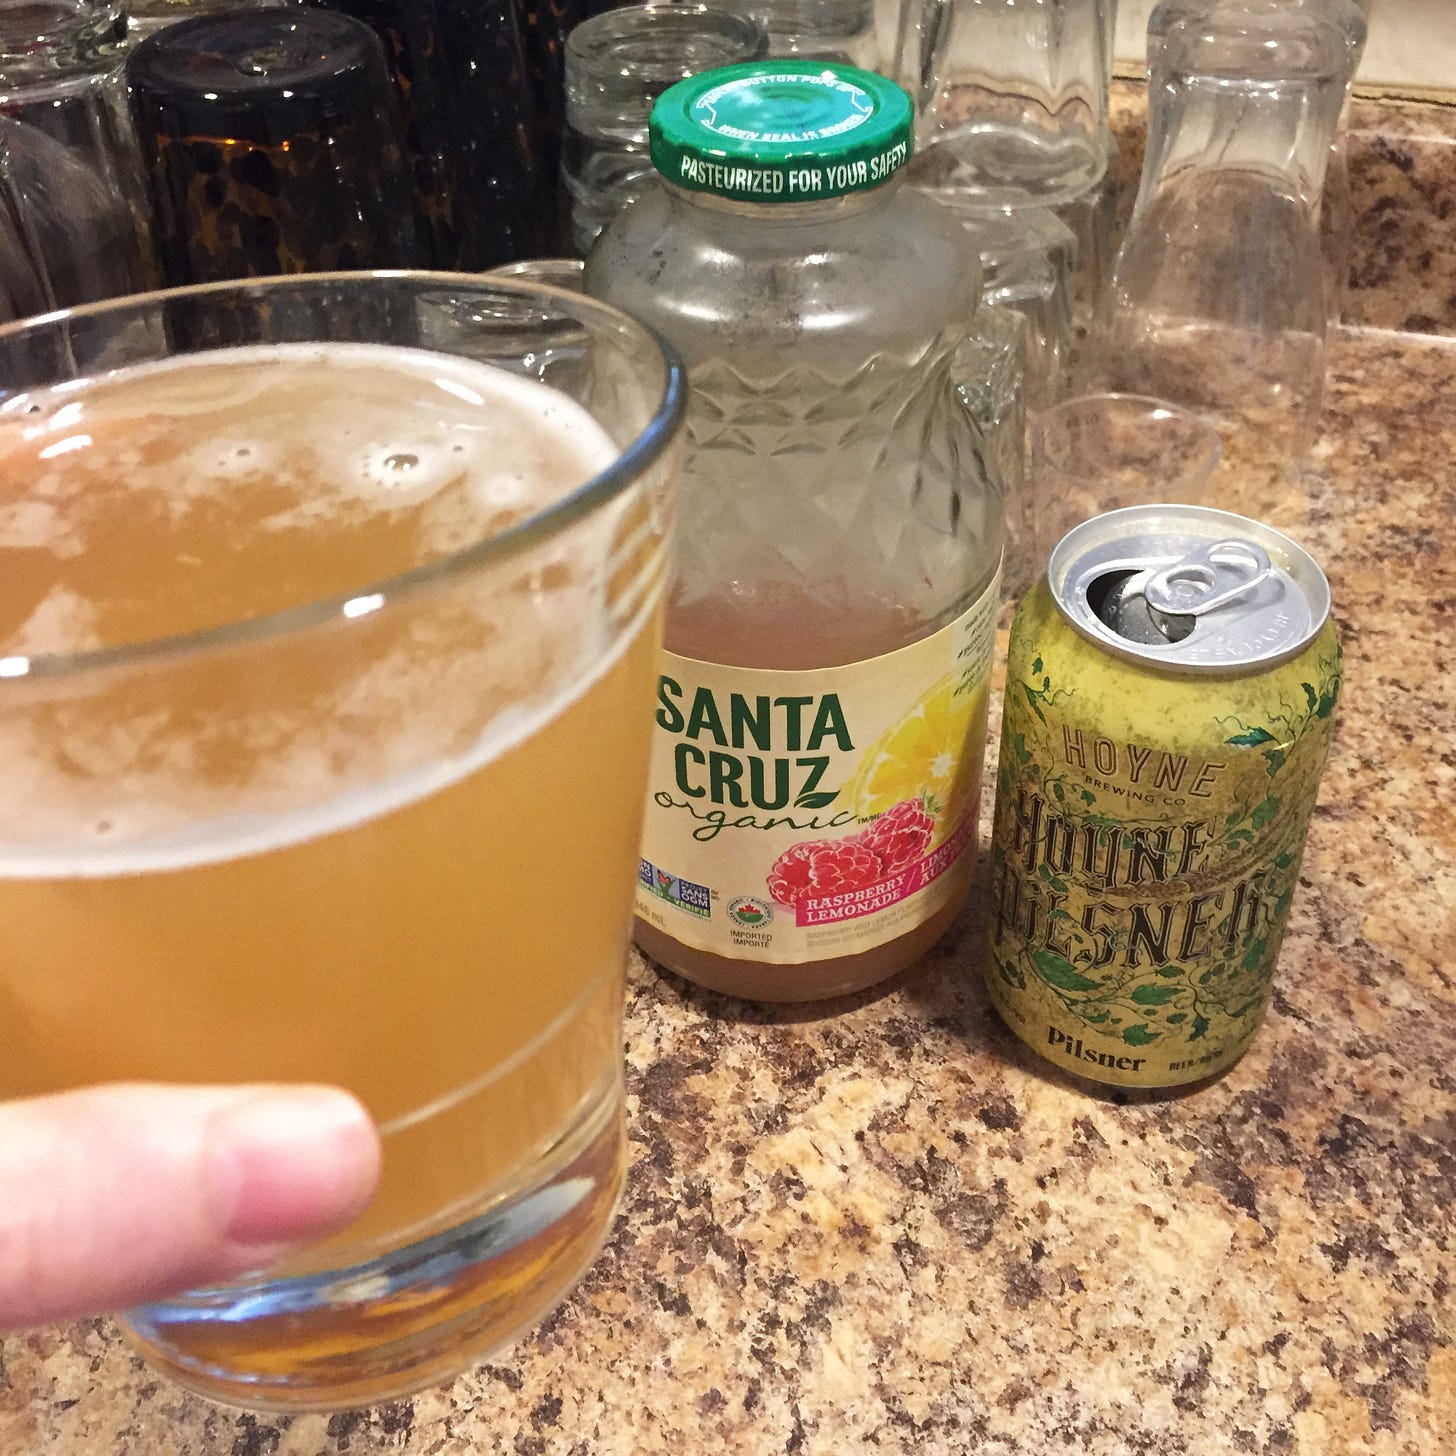 in the foreground, my hand holds a lightly foamy glass of shandy. A bottle of Santa Cruz raspberry lemonade and an open can of Hoyne pilsner are visible in the background.